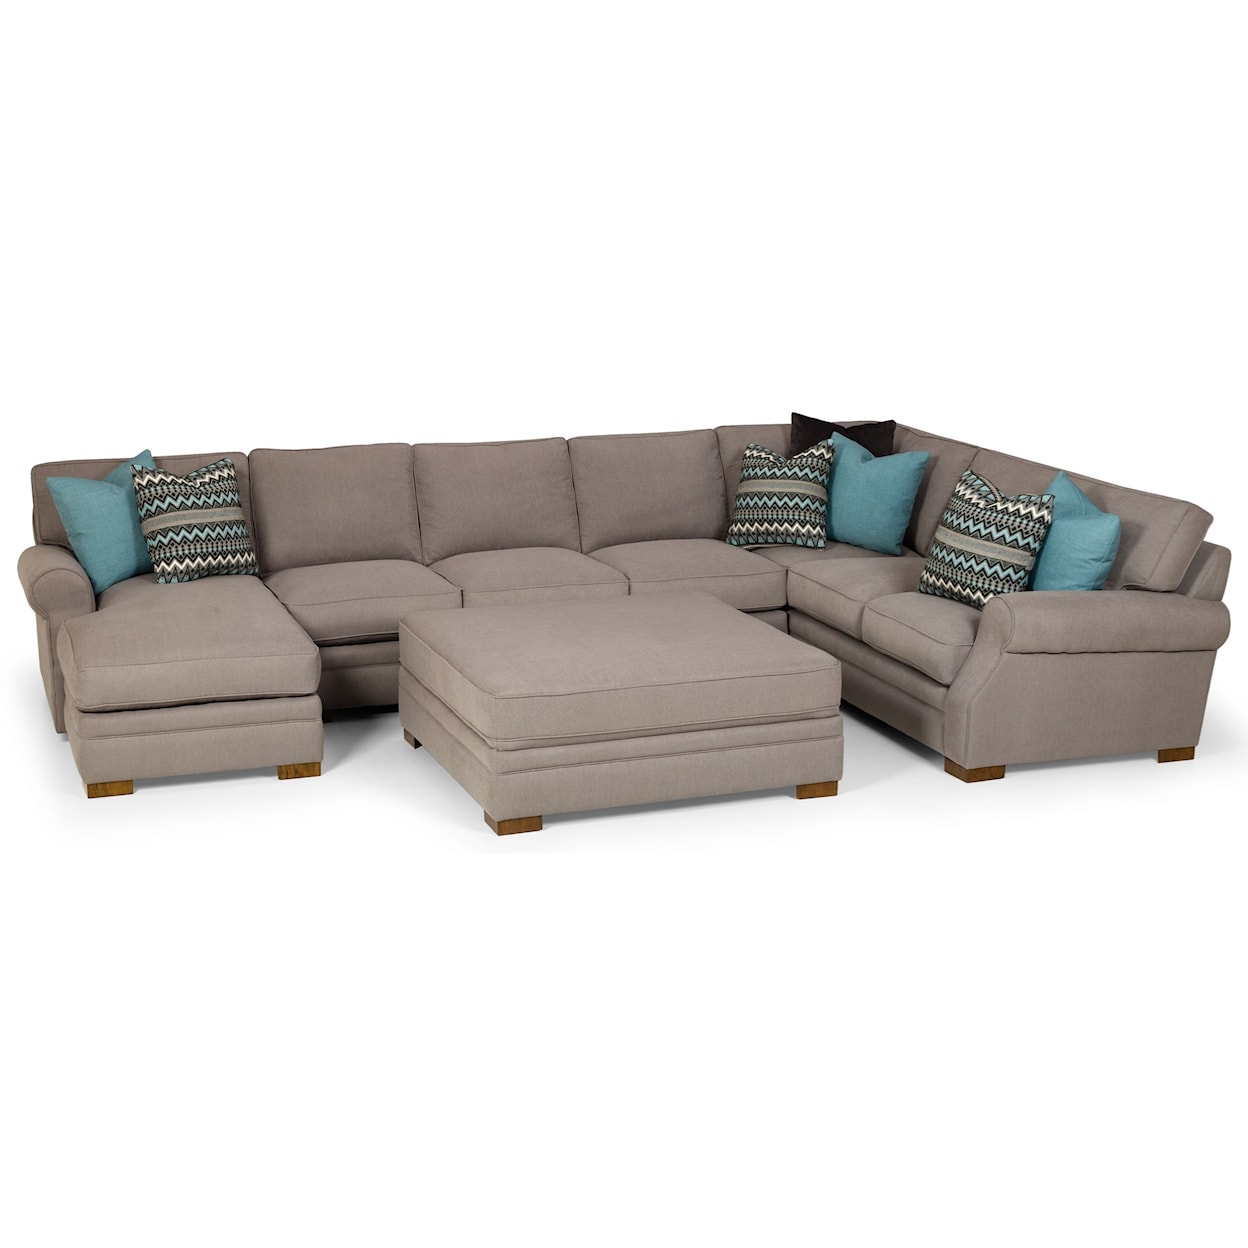 Sunset Home 525 6-Seat Sectional Sofa w/ LAF Chaise